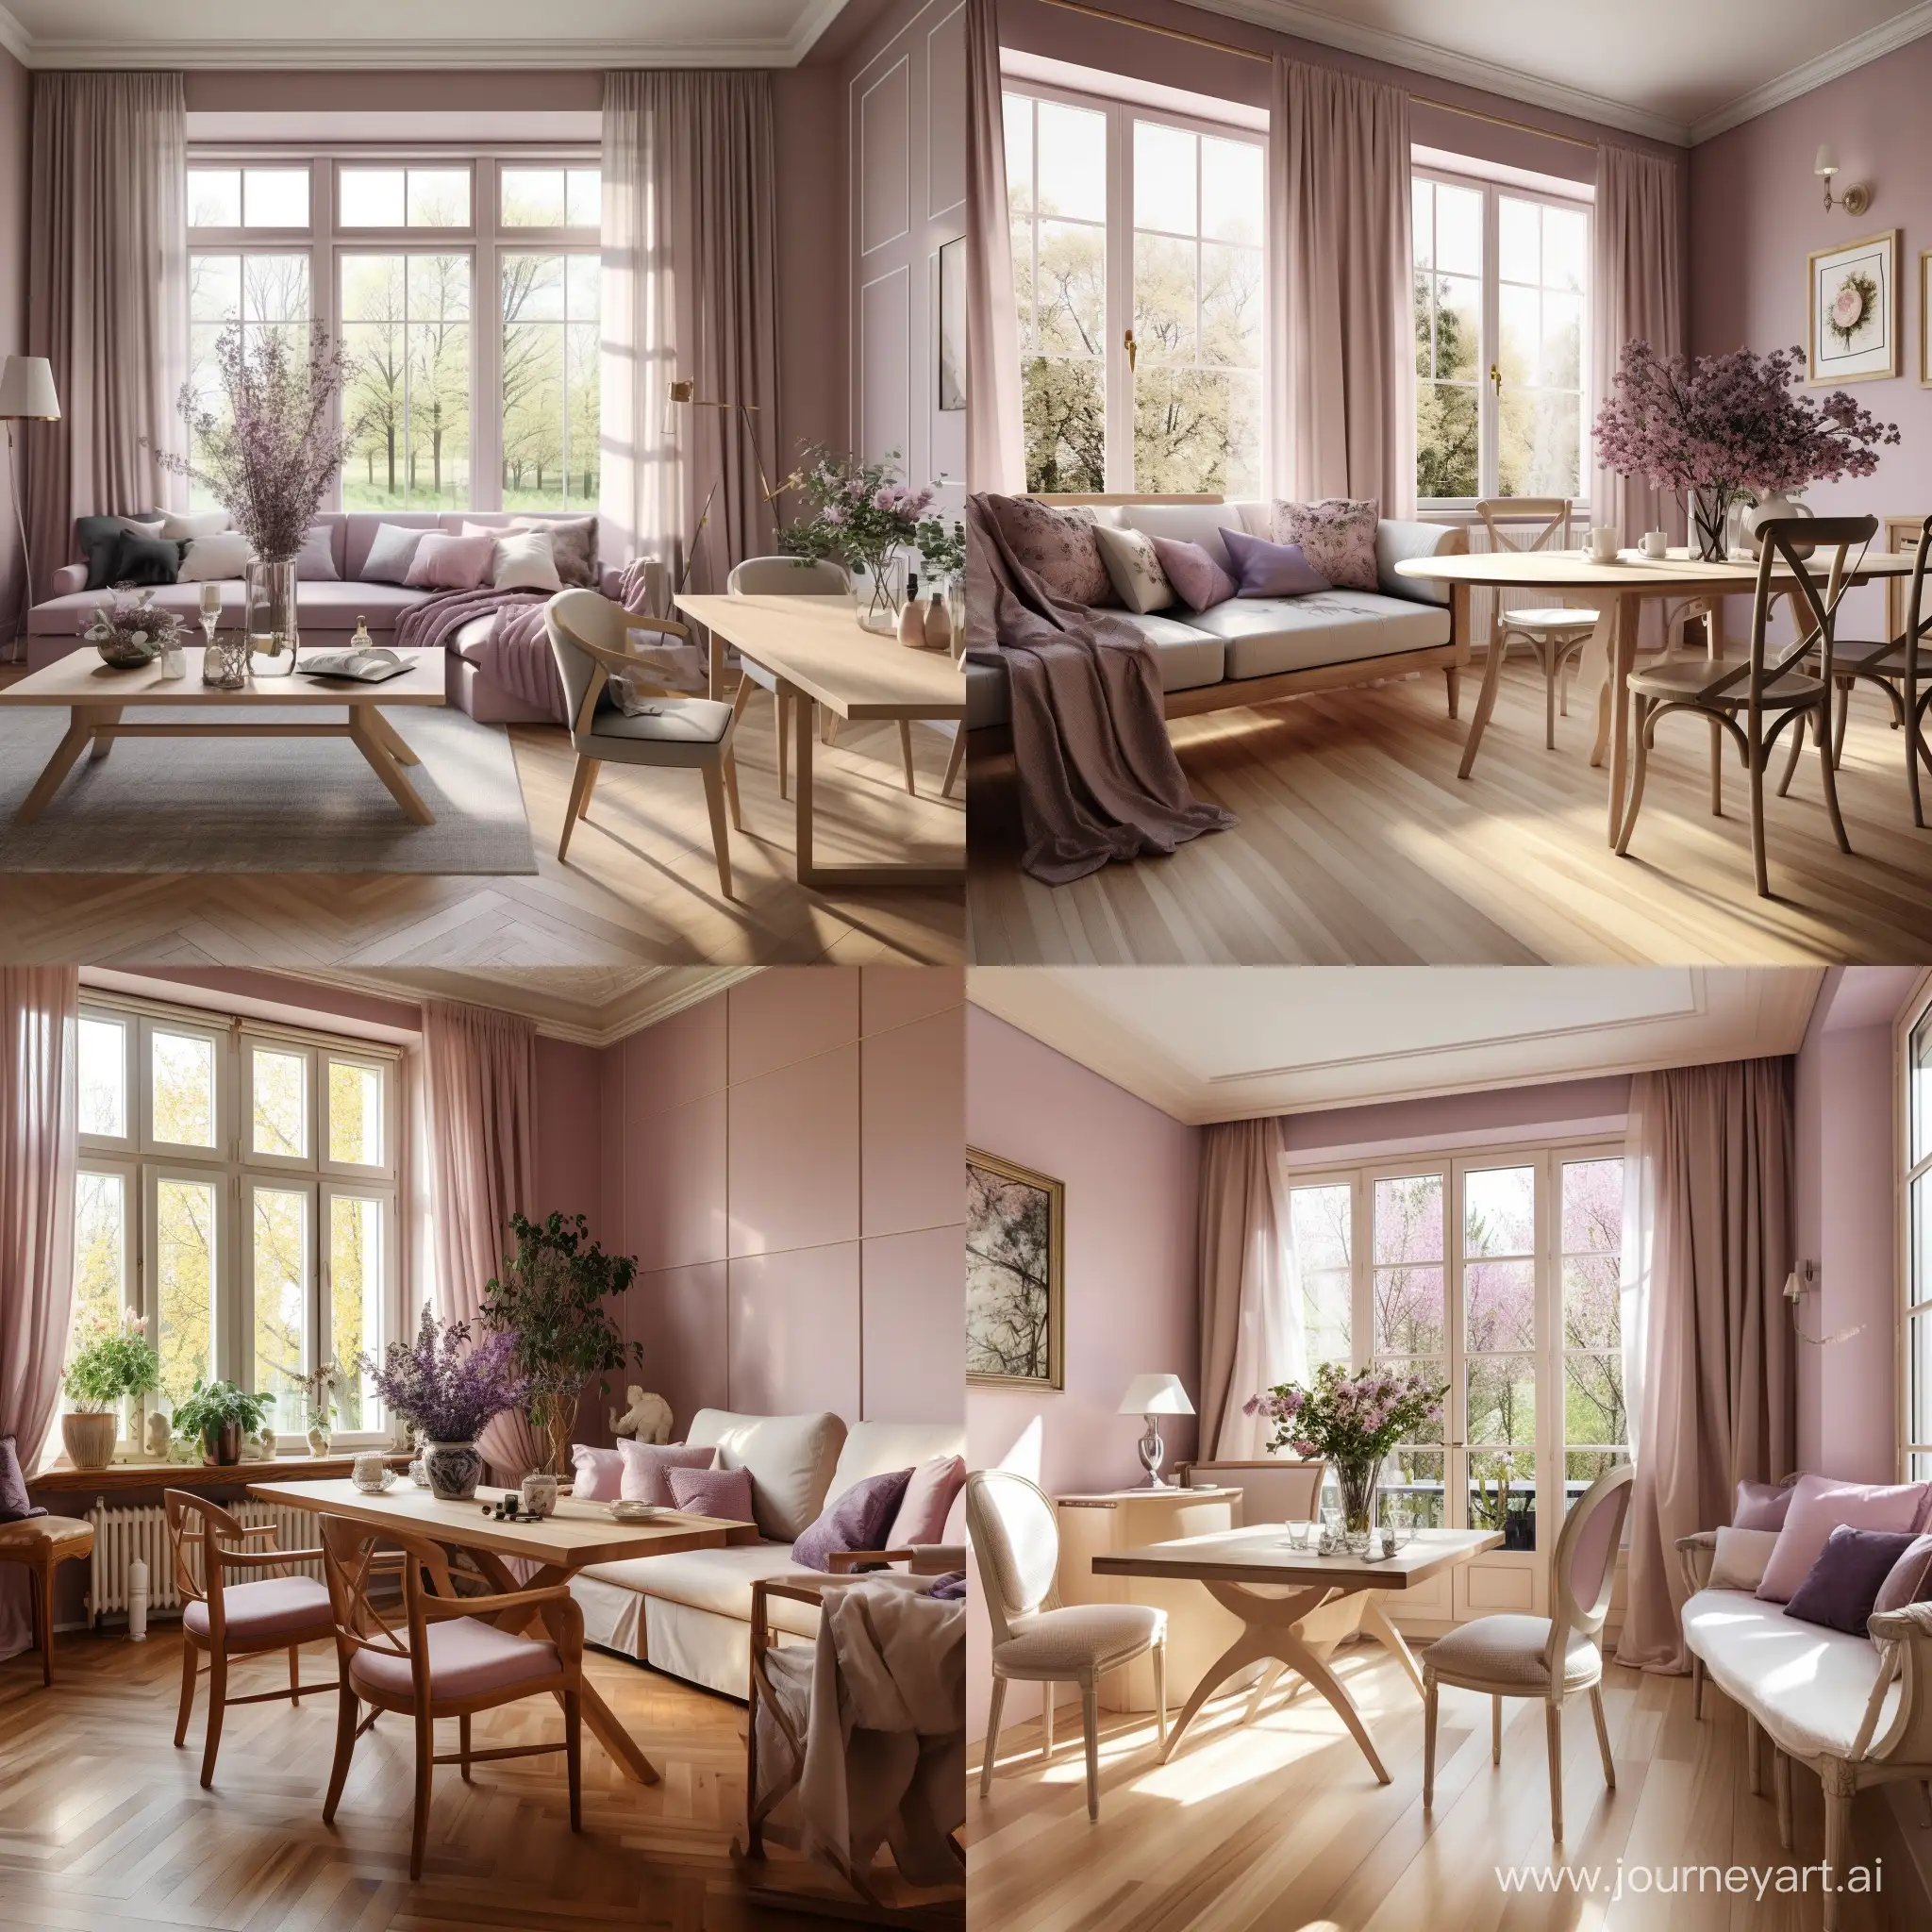 Cozy-Living-Room-with-Garden-View-in-Mauve-and-Beige-Tones